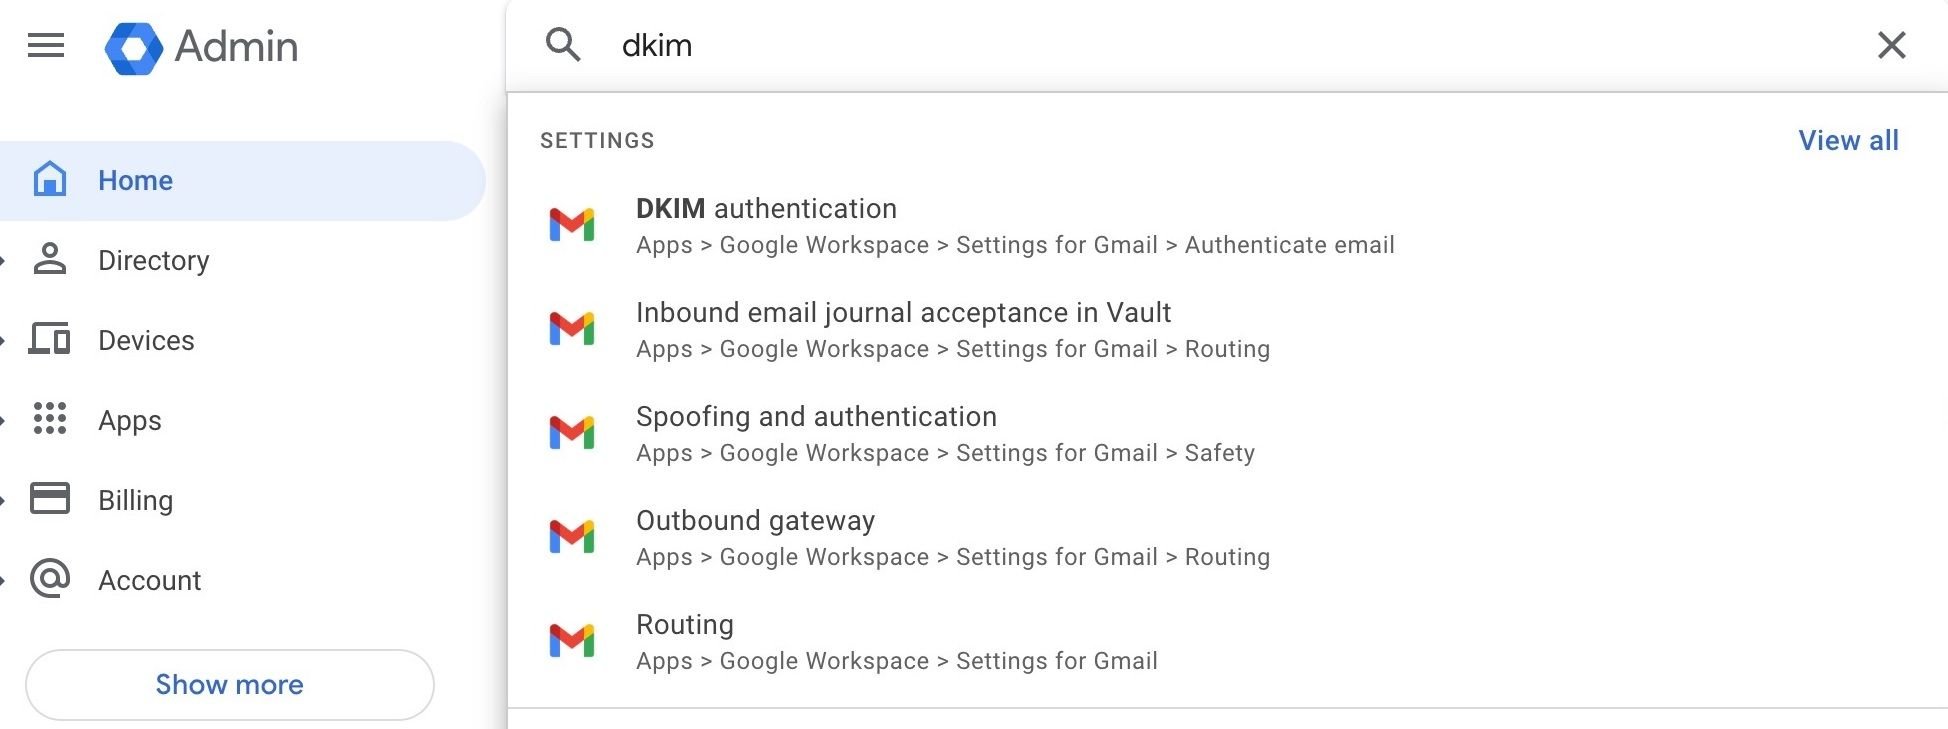 Google Workspace user interface with settings for DKIM authentication